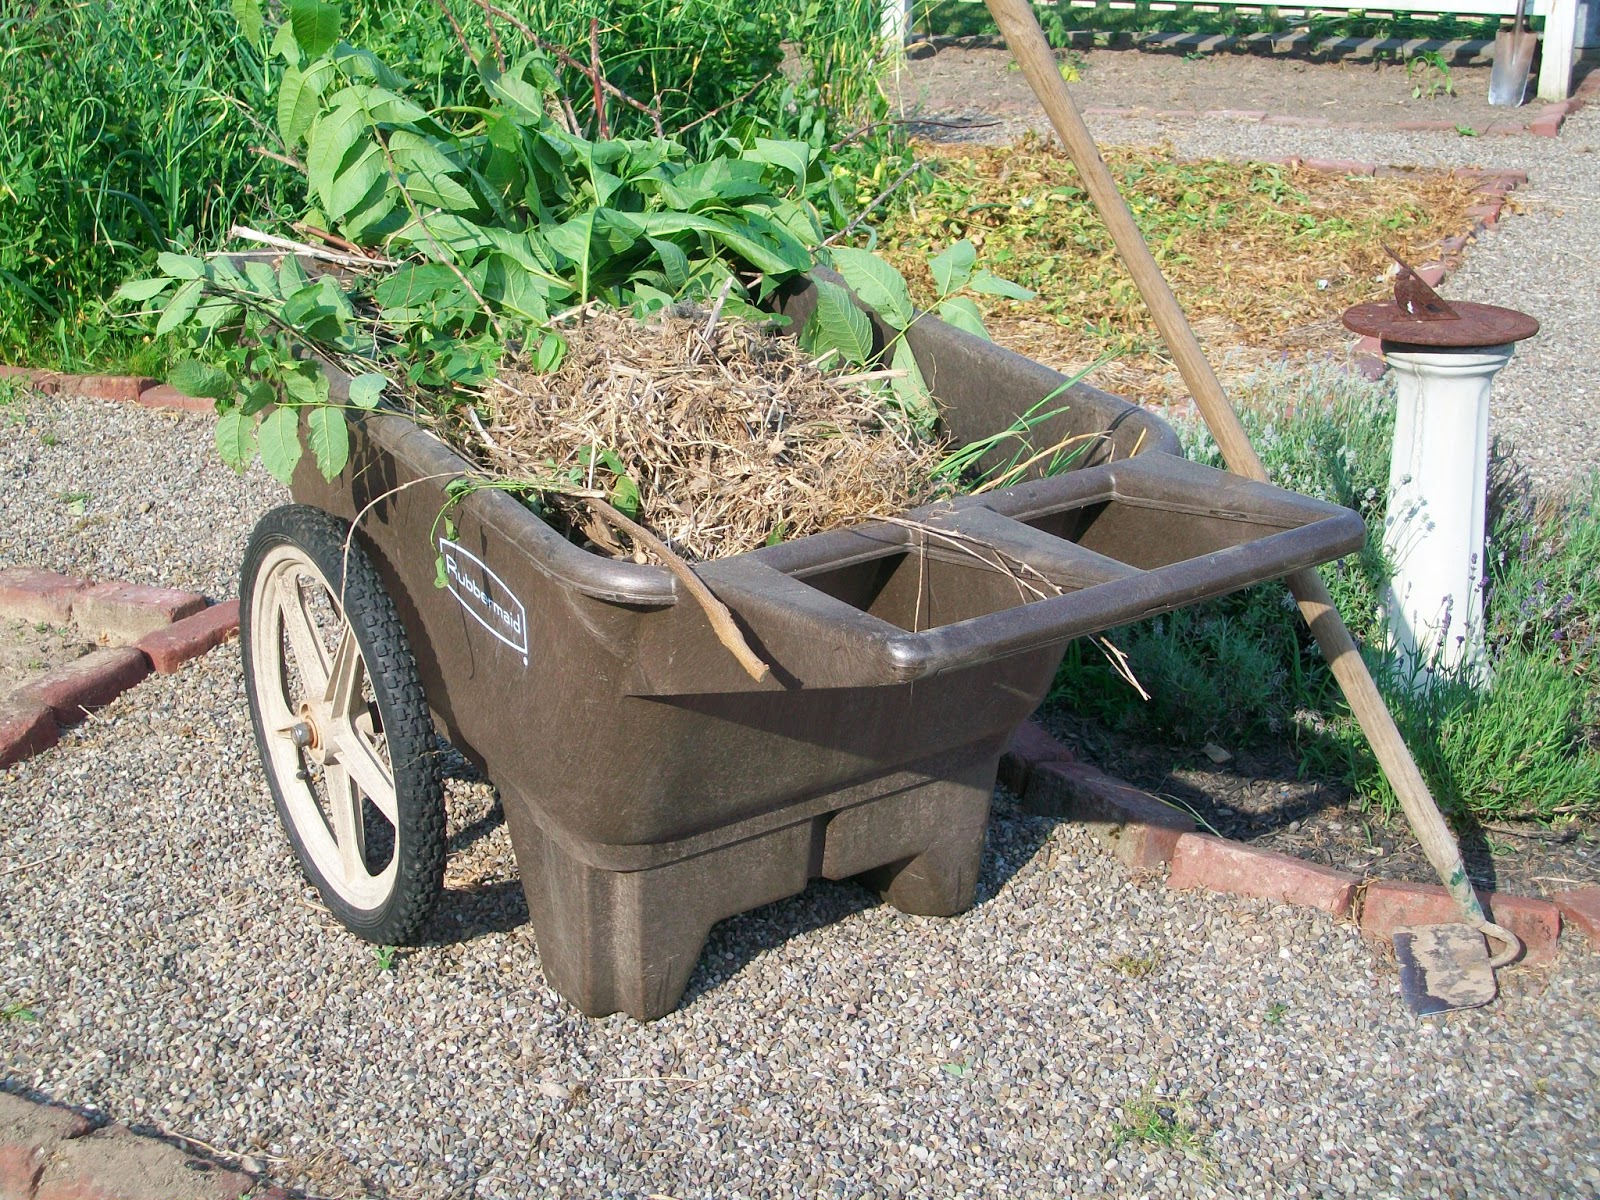 The Salty Gardener How To Replace Wheels On Rubbermaid Cart